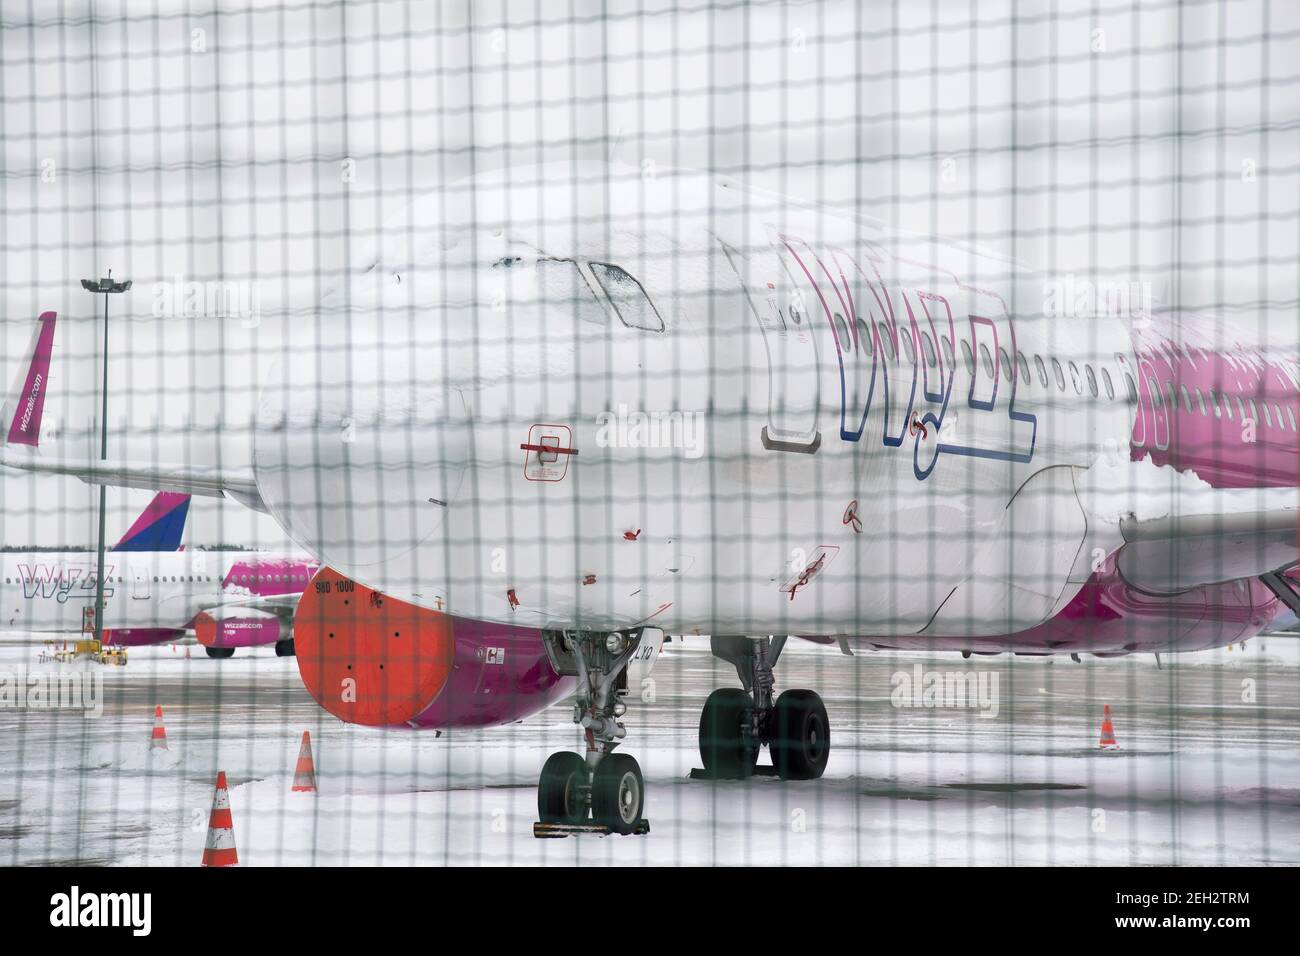 Low cost airline Wizz Air aircraft Airbus A320-232 in Gdansk, Poland. February 7th 2021 © Wojciech Strozyk / Alamy Stock Photo *** Local Caption *** Stock Photo